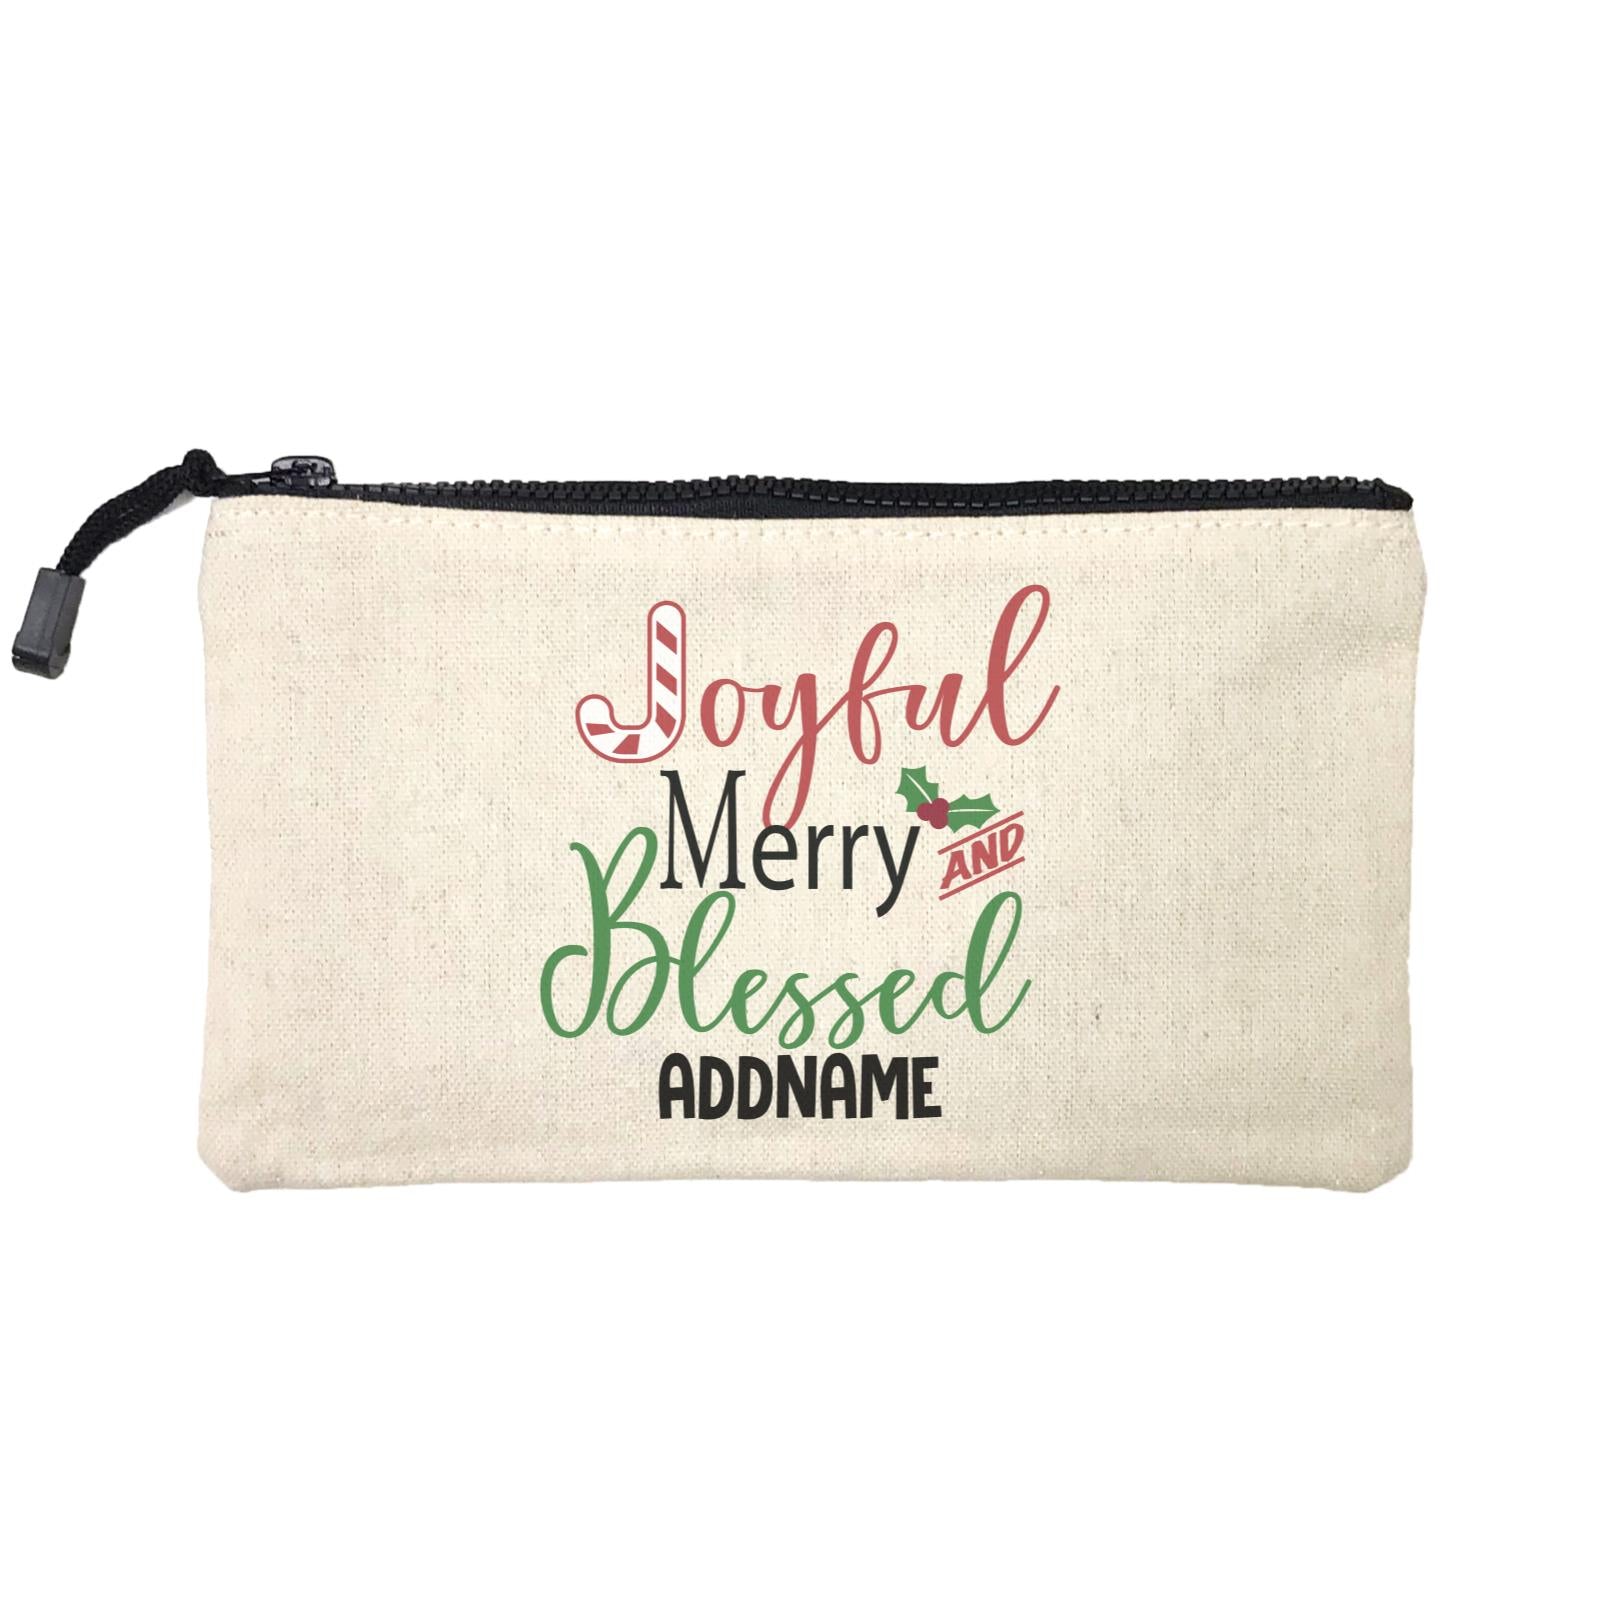 Xmas Joyful Merry and Blessed Mini Accessories Stationery Pouch